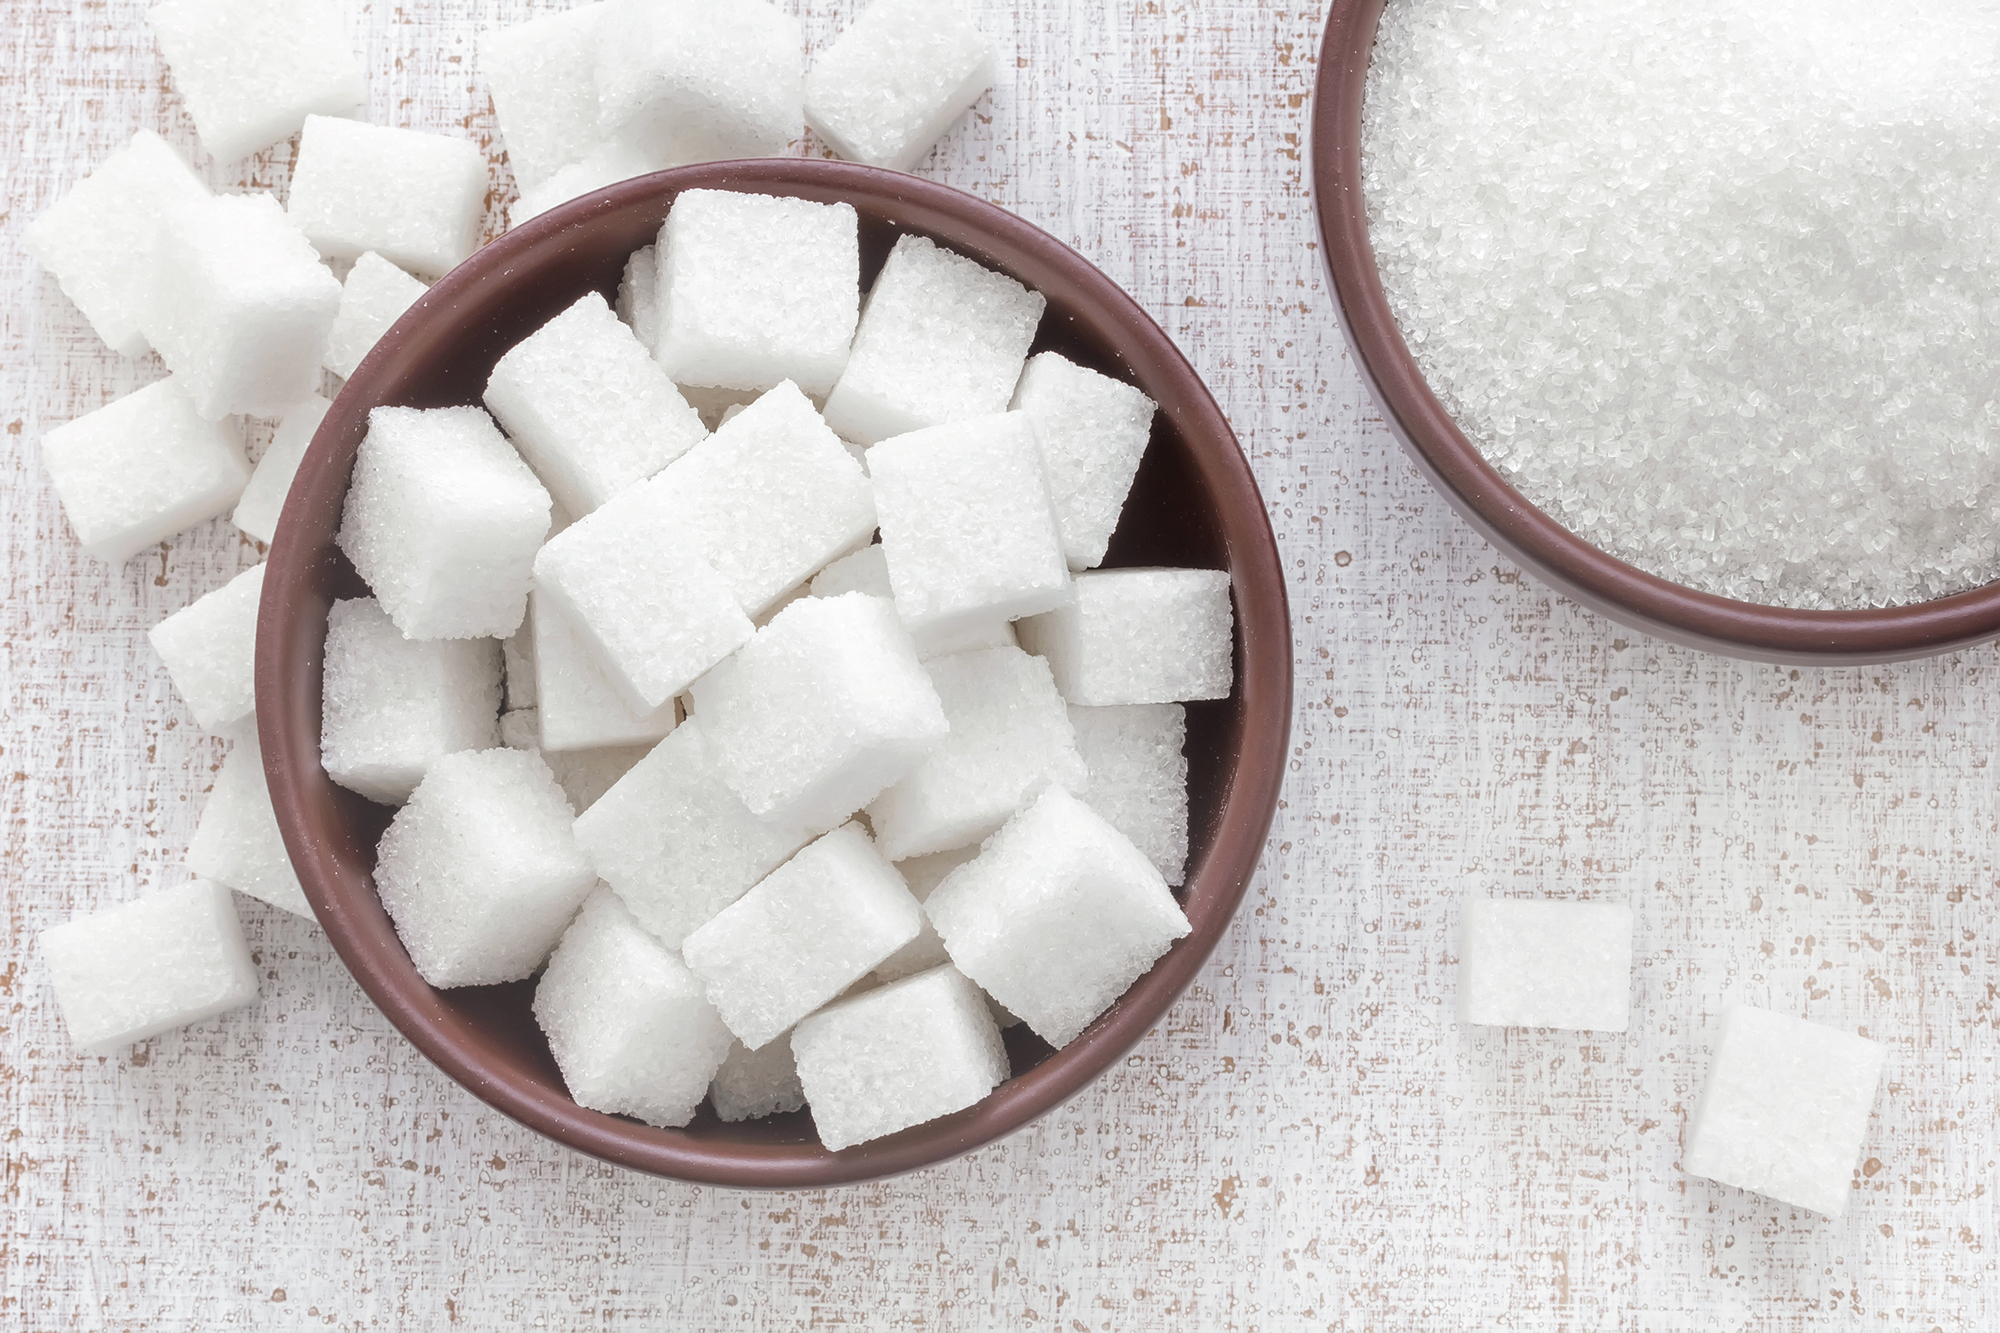 Sugar and your health